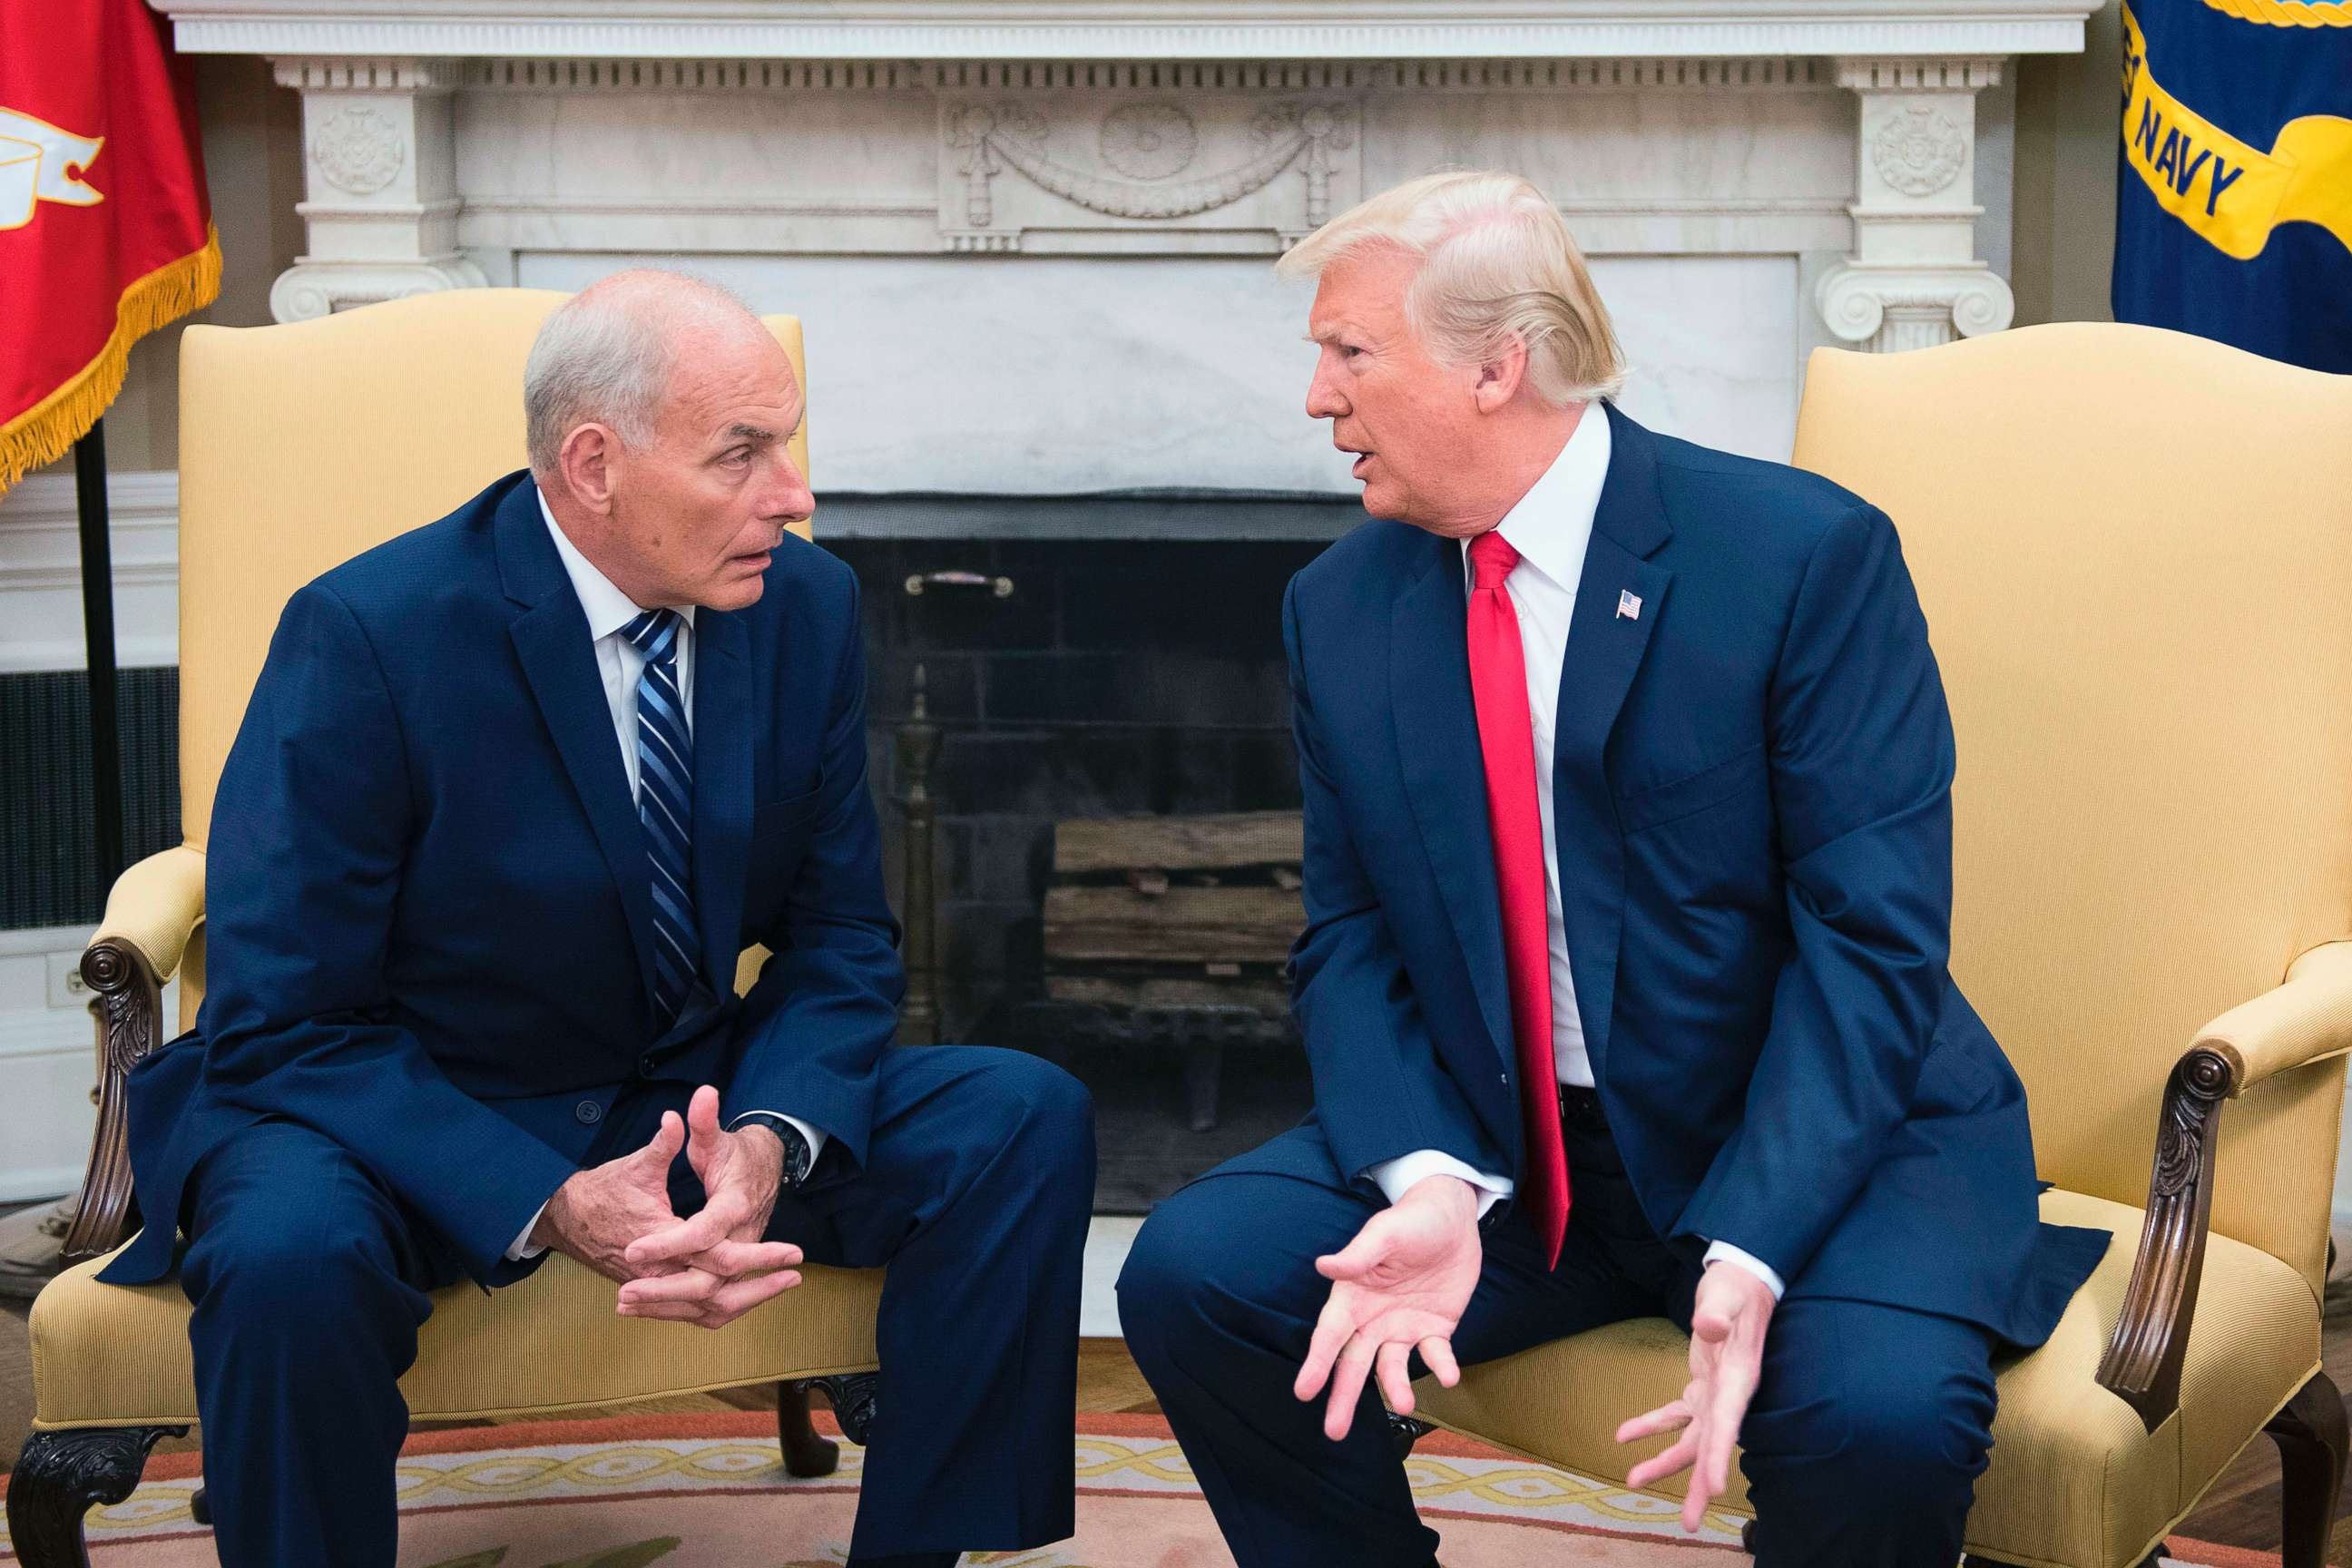 PHOTO: In this file photo, President Donald Trump (R) speaks with newly sworn-in White House Chief of Staff John Kelly at the White House in Washington, DC, July 31, 2017.